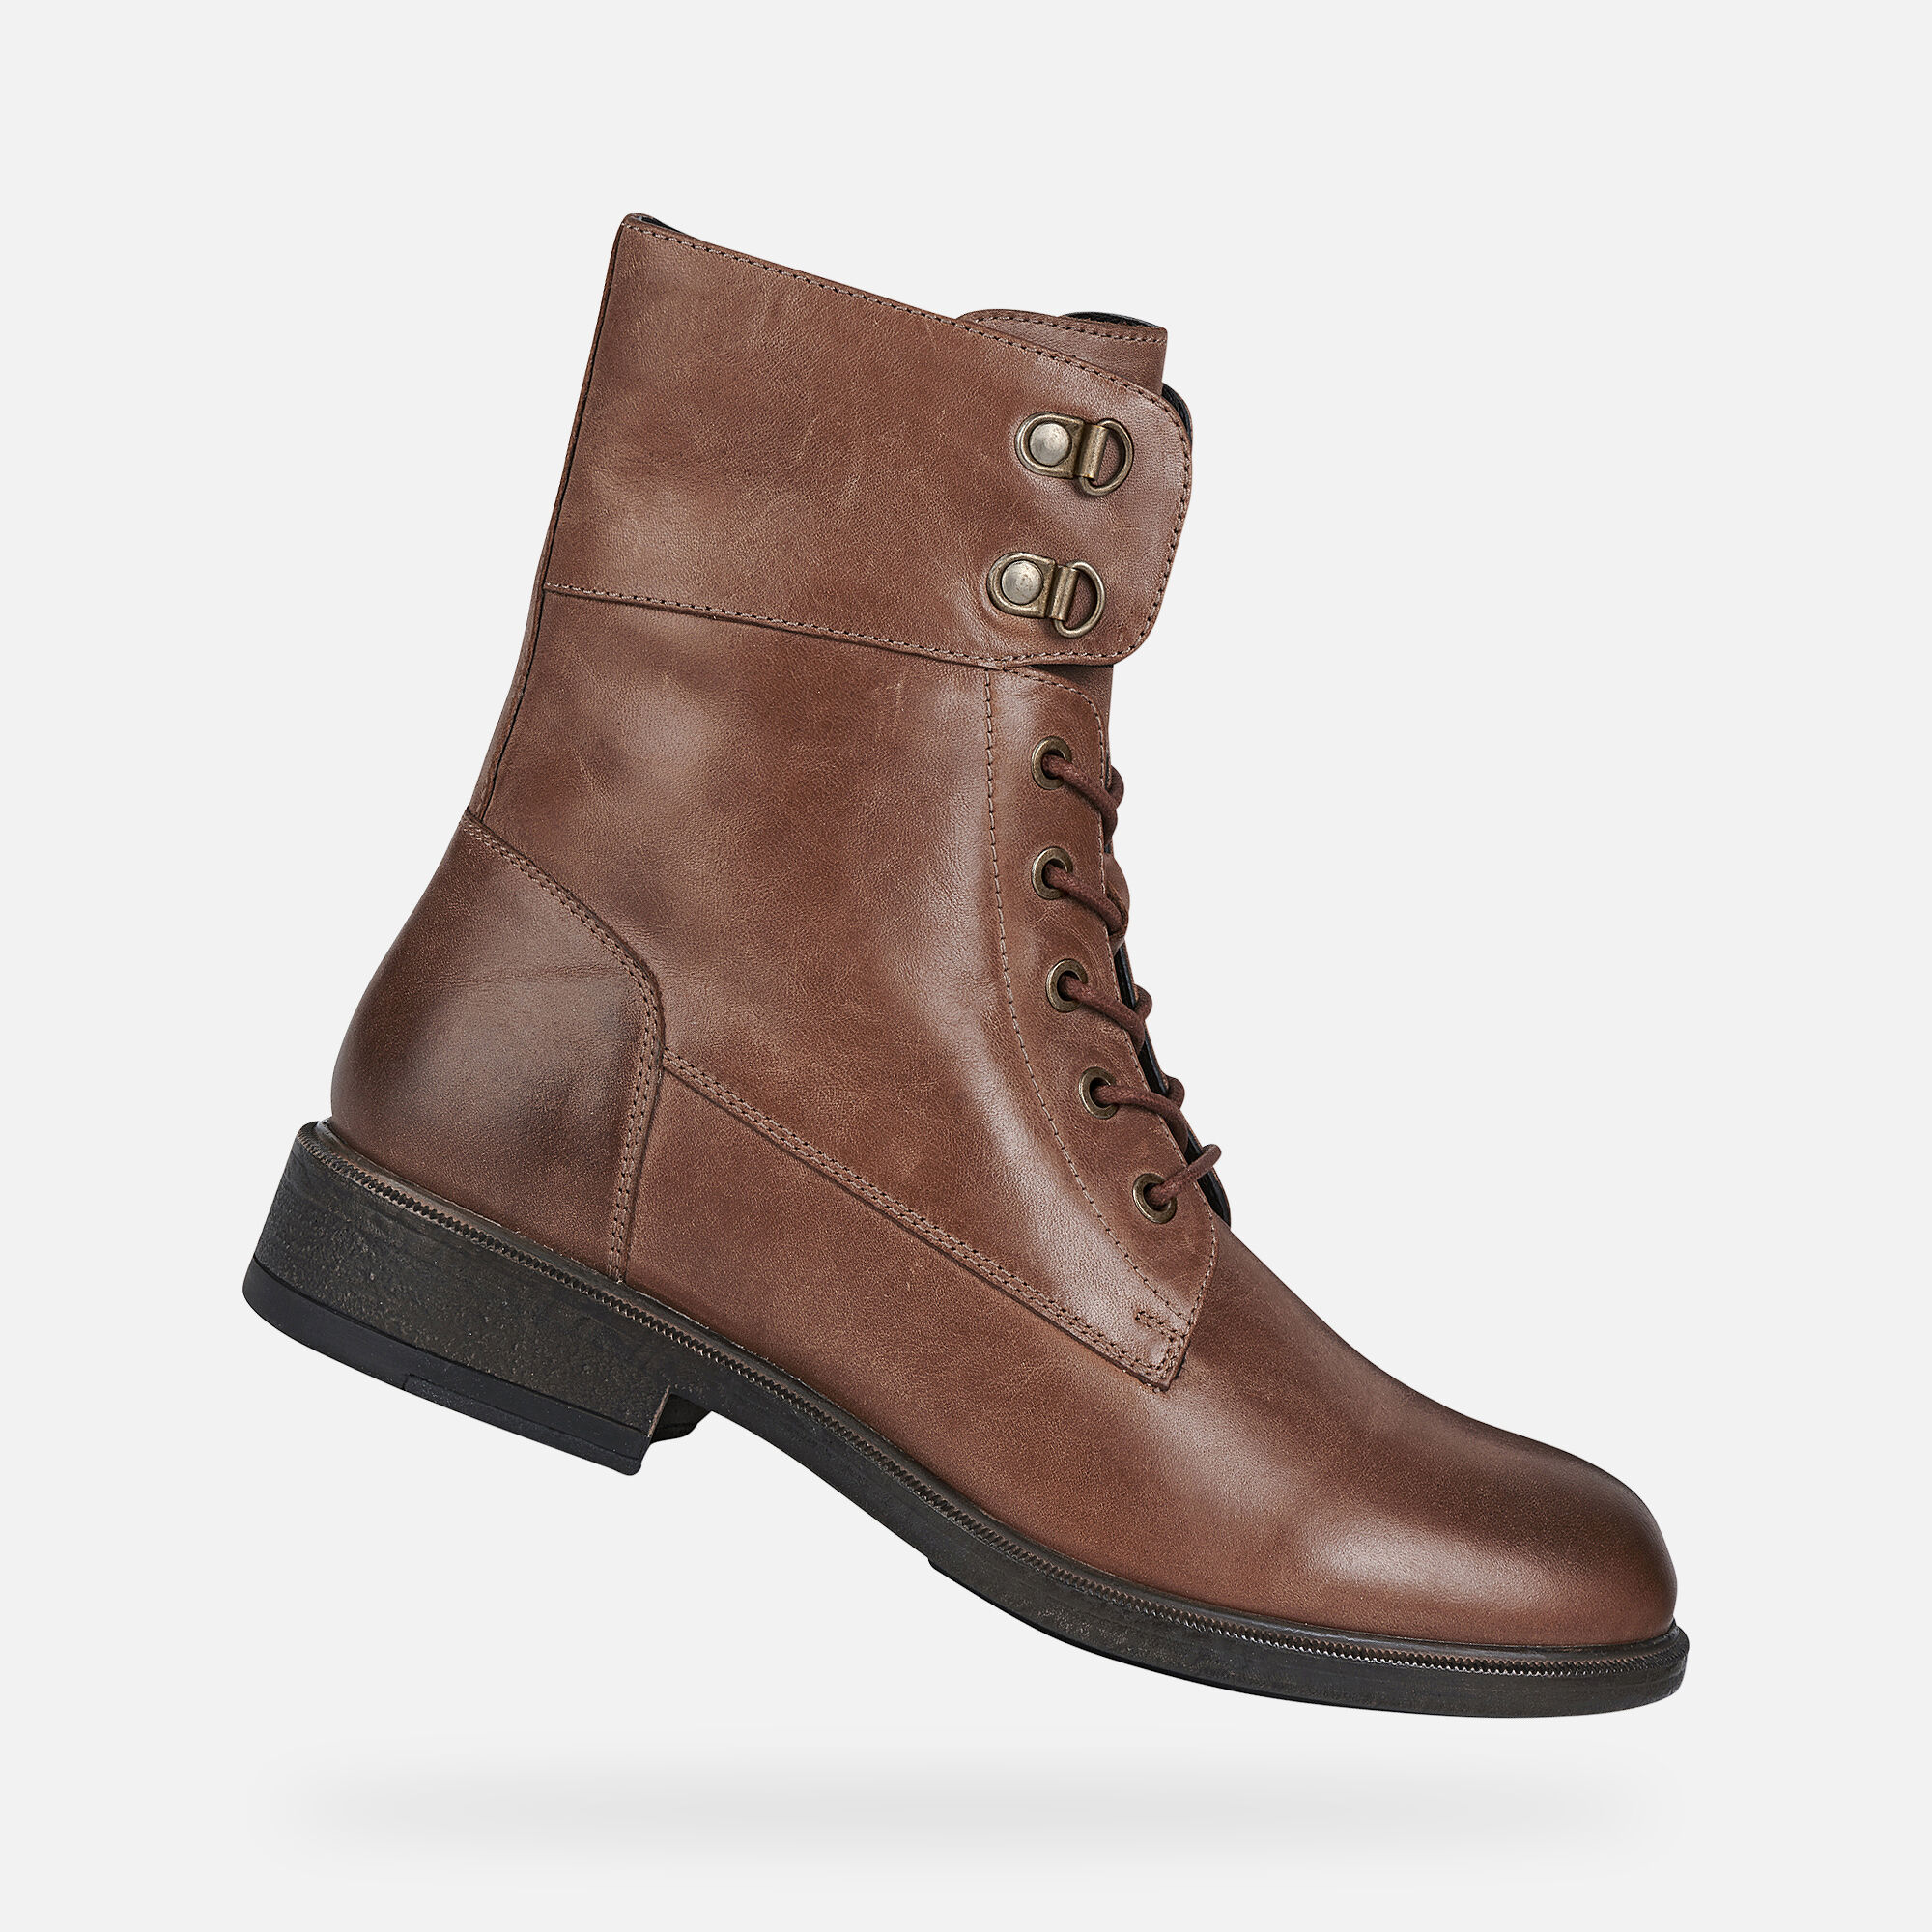 Geox CATRIA Woman: Chestnut Ankle Boots 